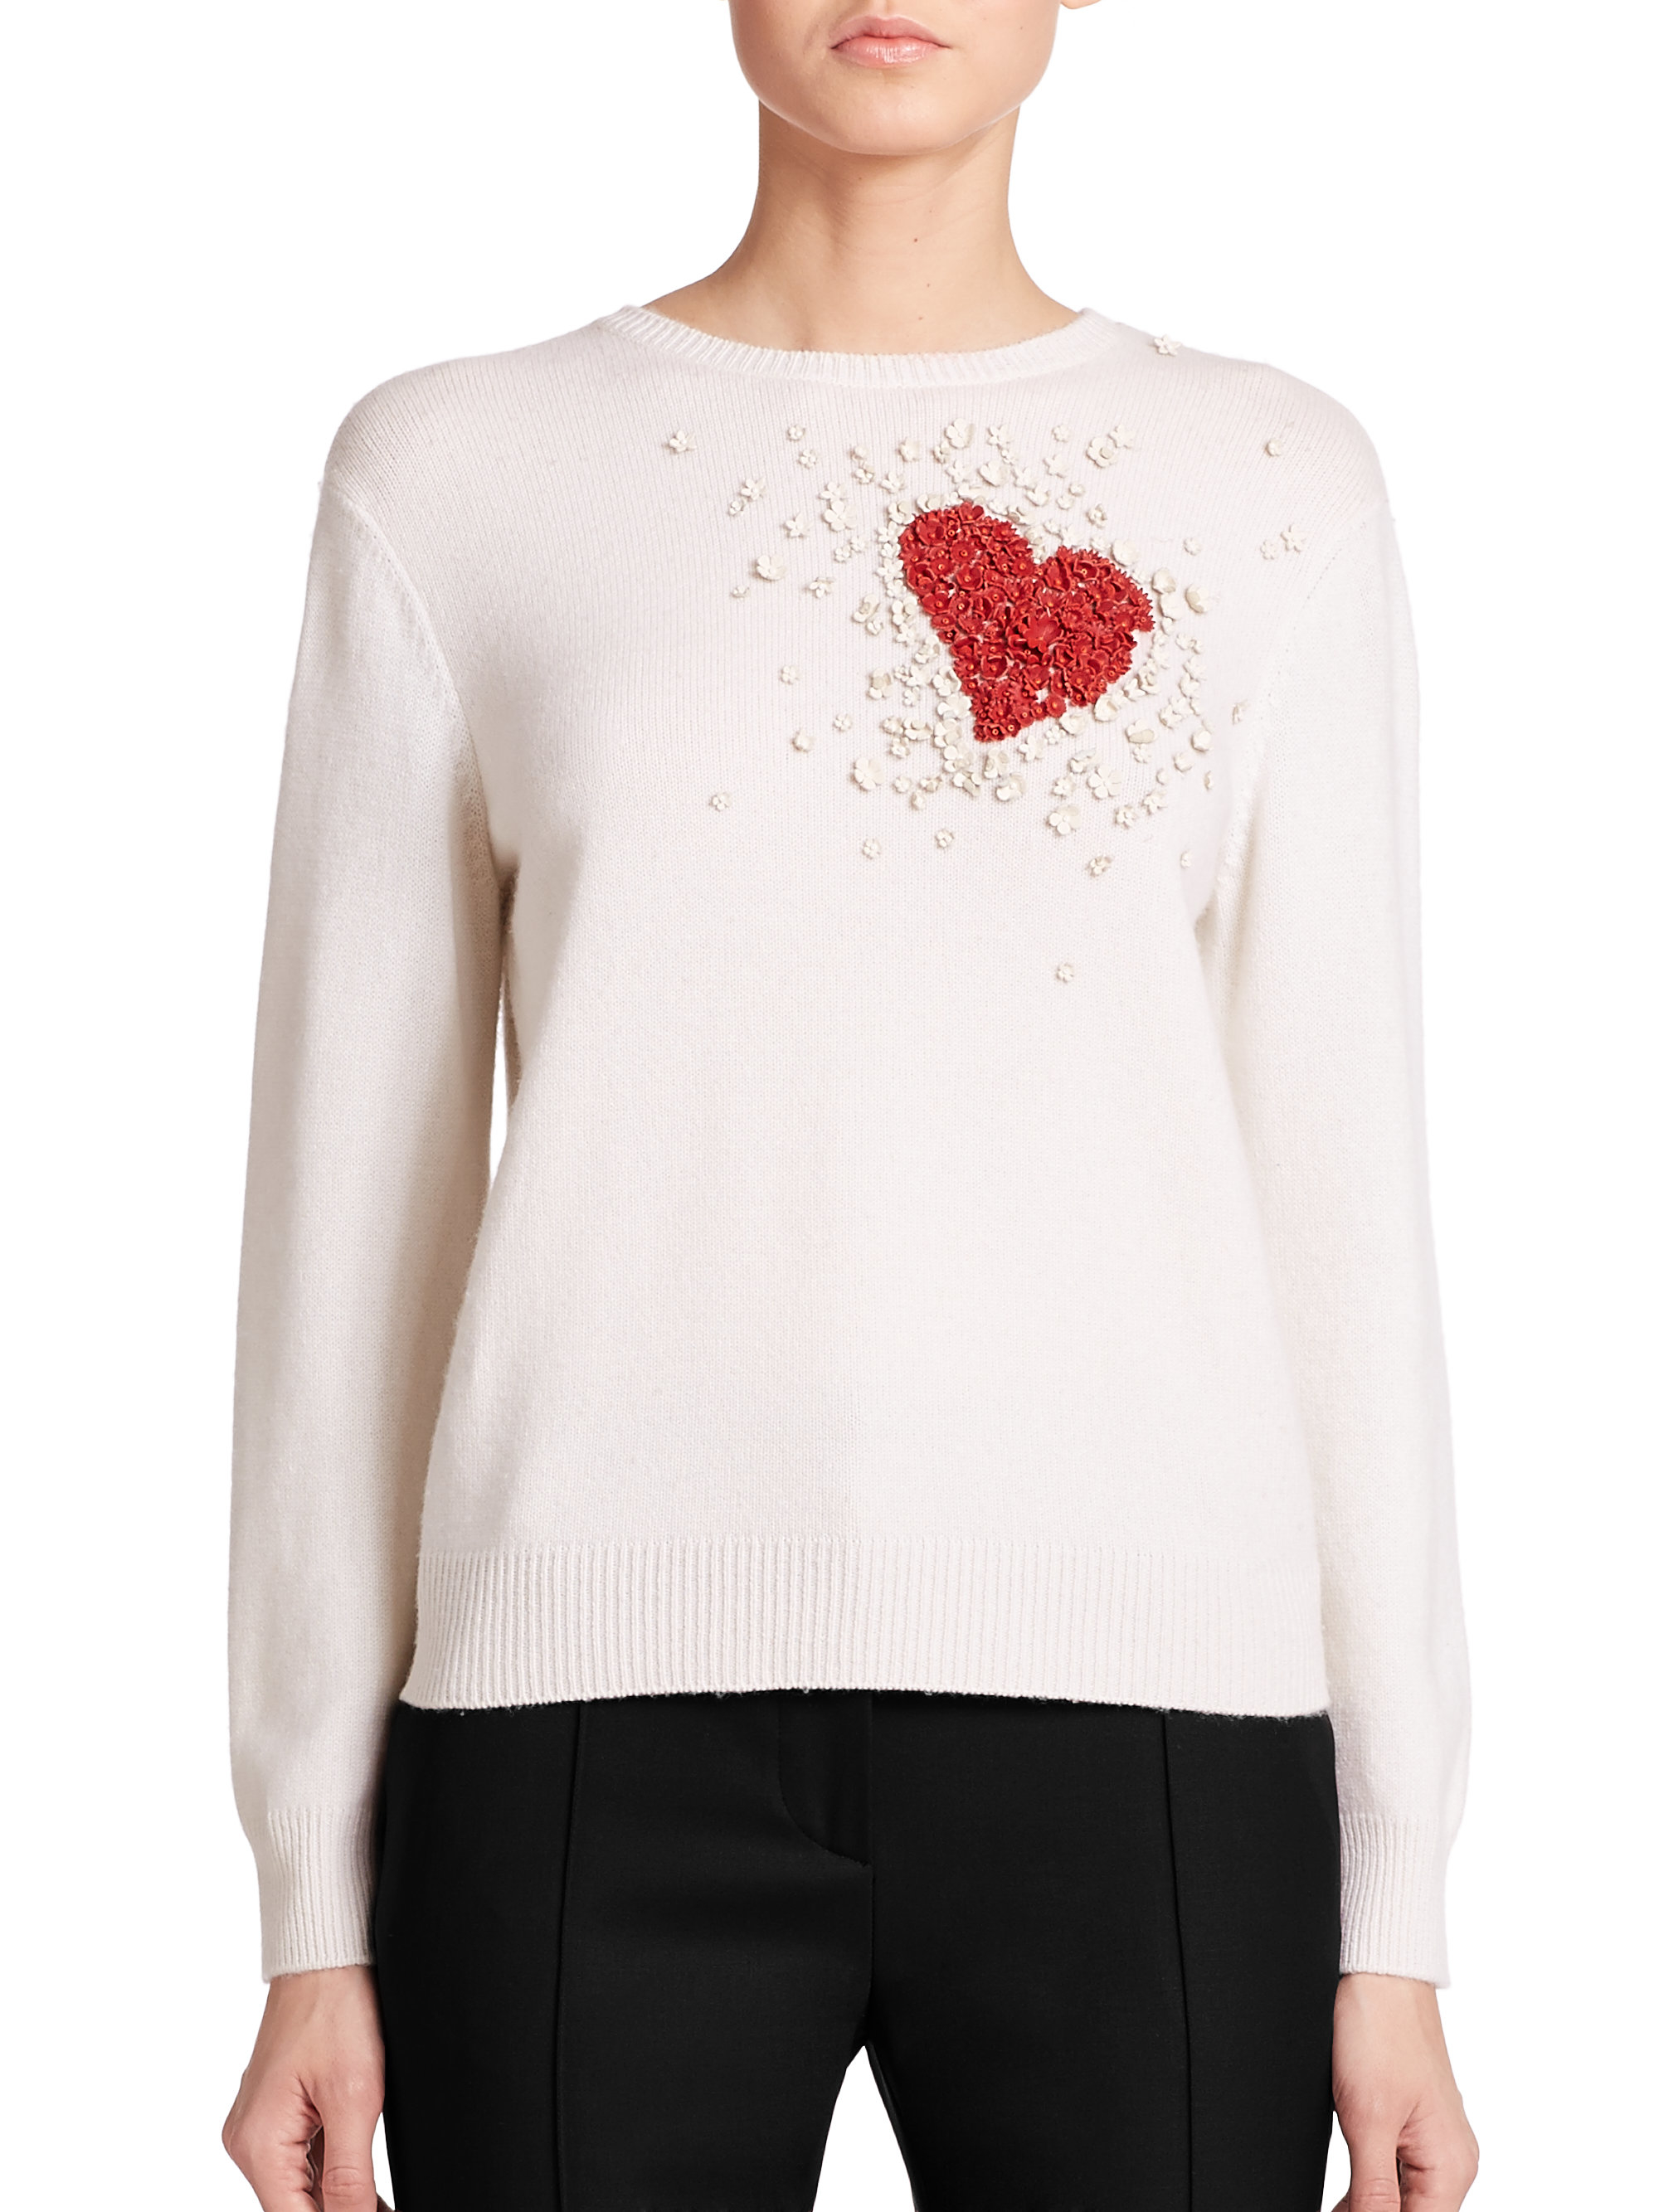 Valentino Beaded Cashmere Heart Sweater in White | Lyst